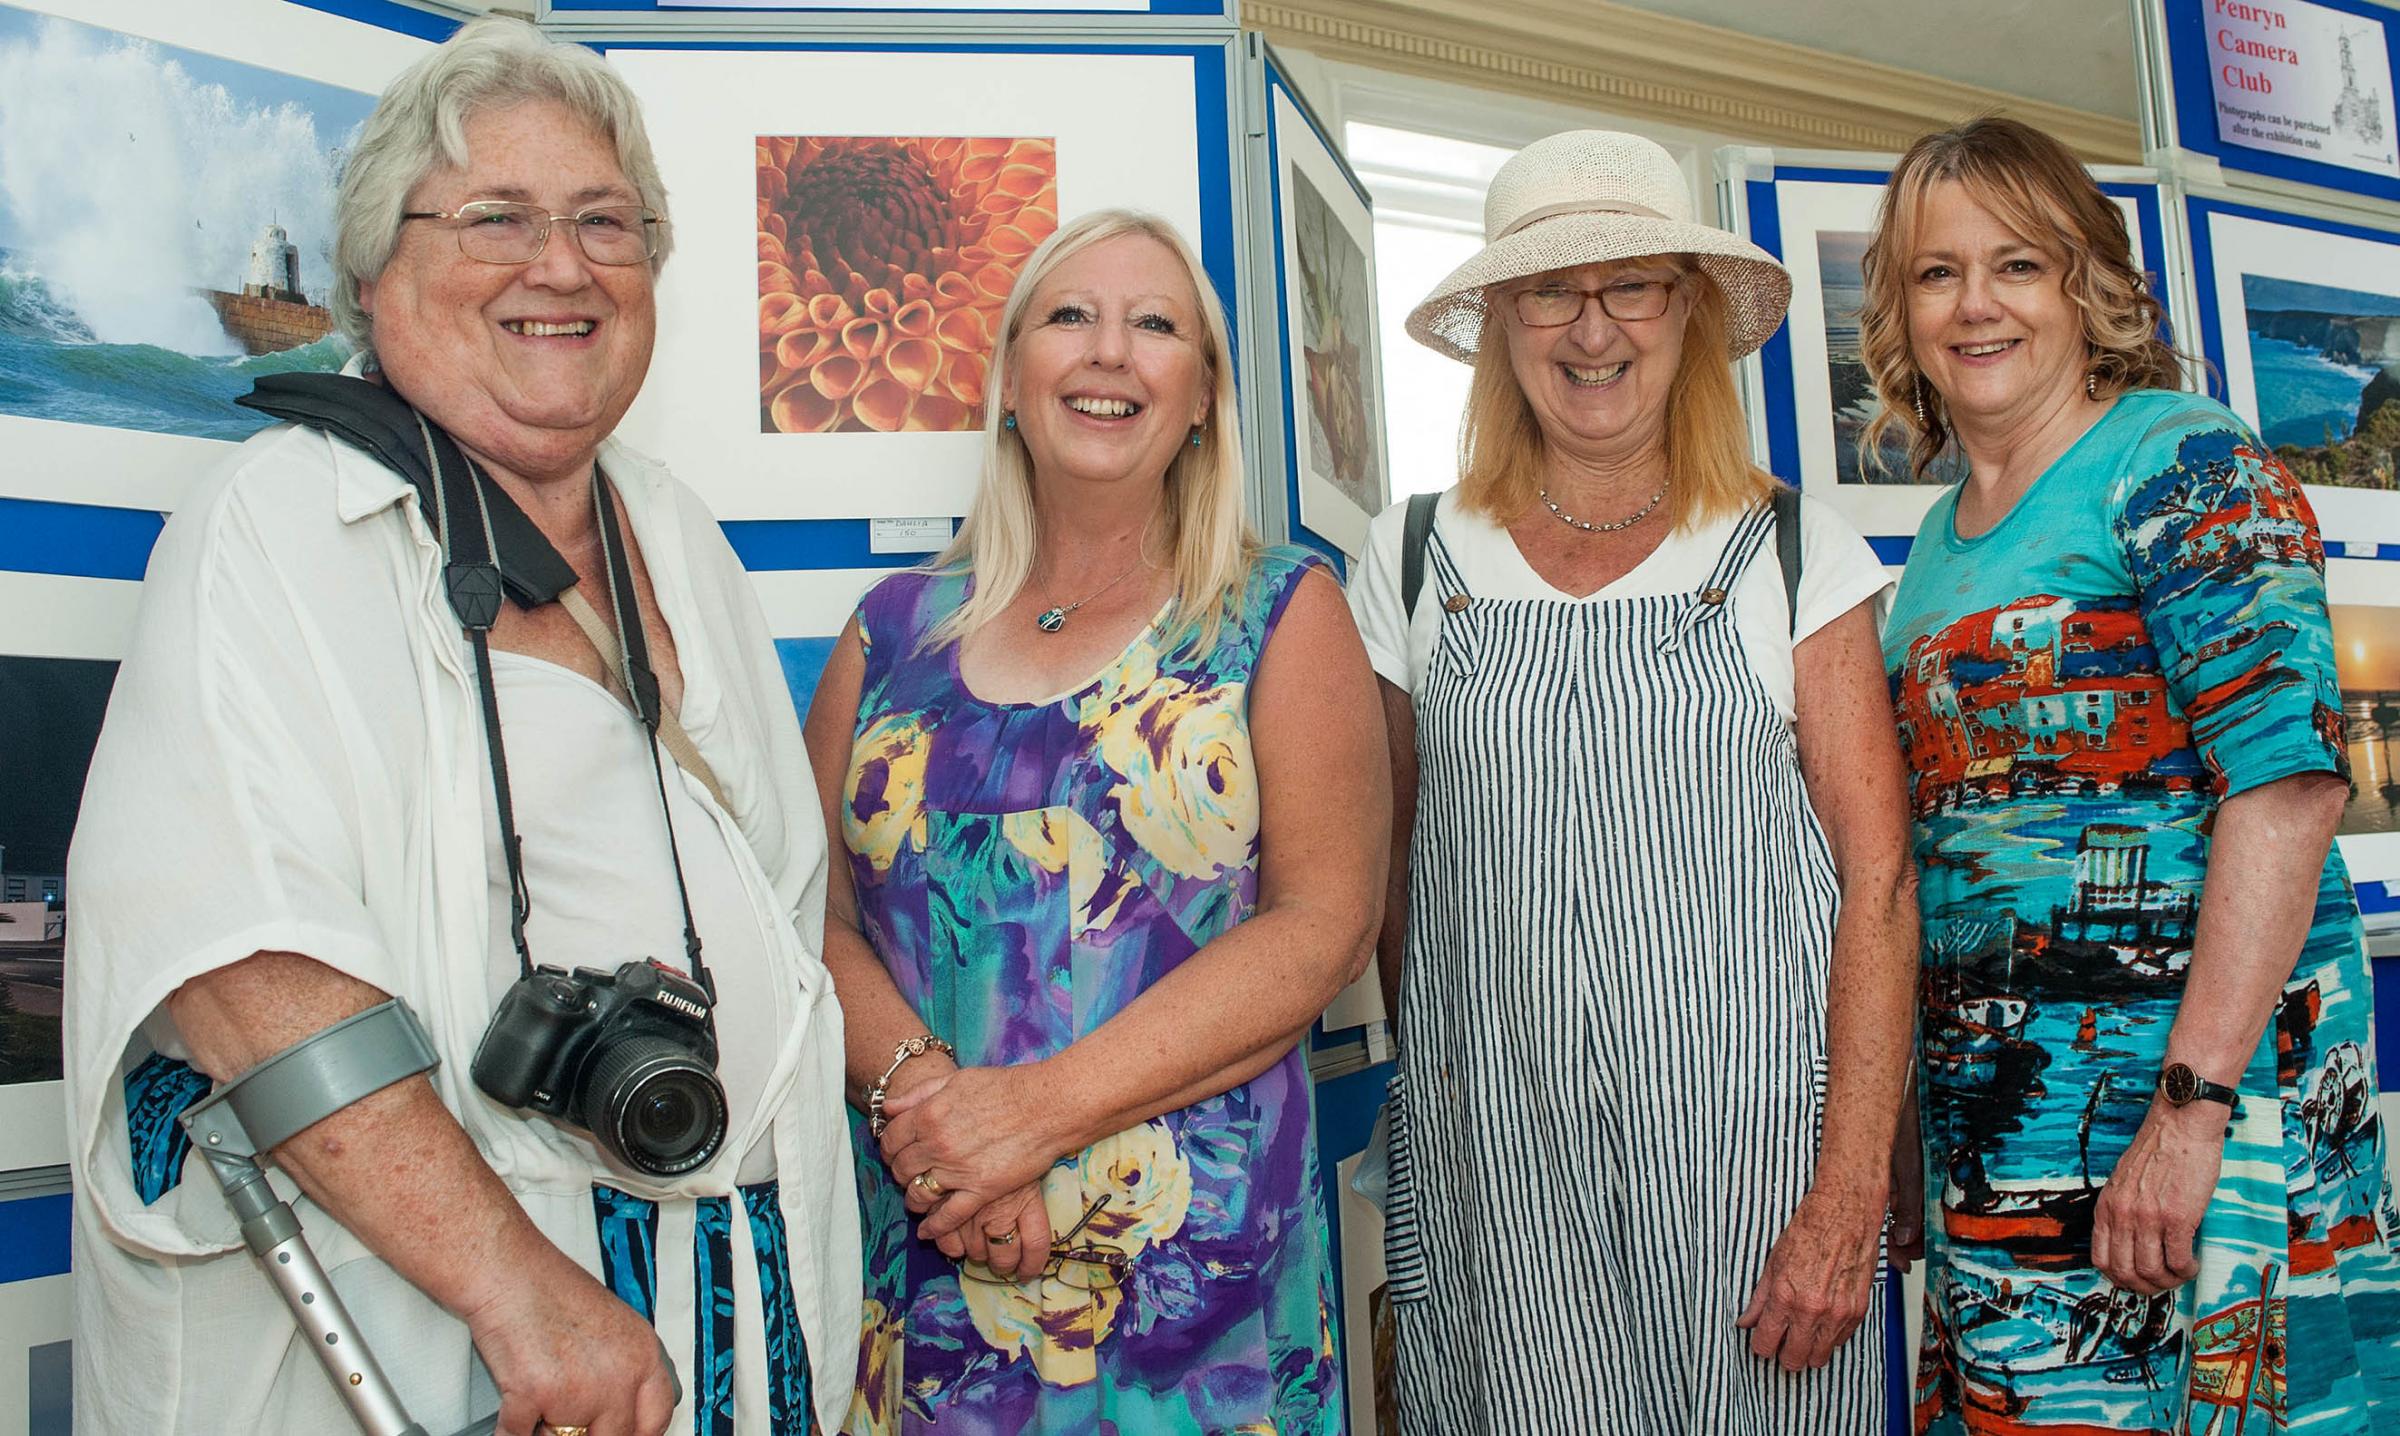 Penryn Camera Club photographers L/R: Carol Coward, Karen Burton, Eve Govier and Claire Dougal pictured at the clubs exhibition in the Town Hall. Picture by Colin Higgs